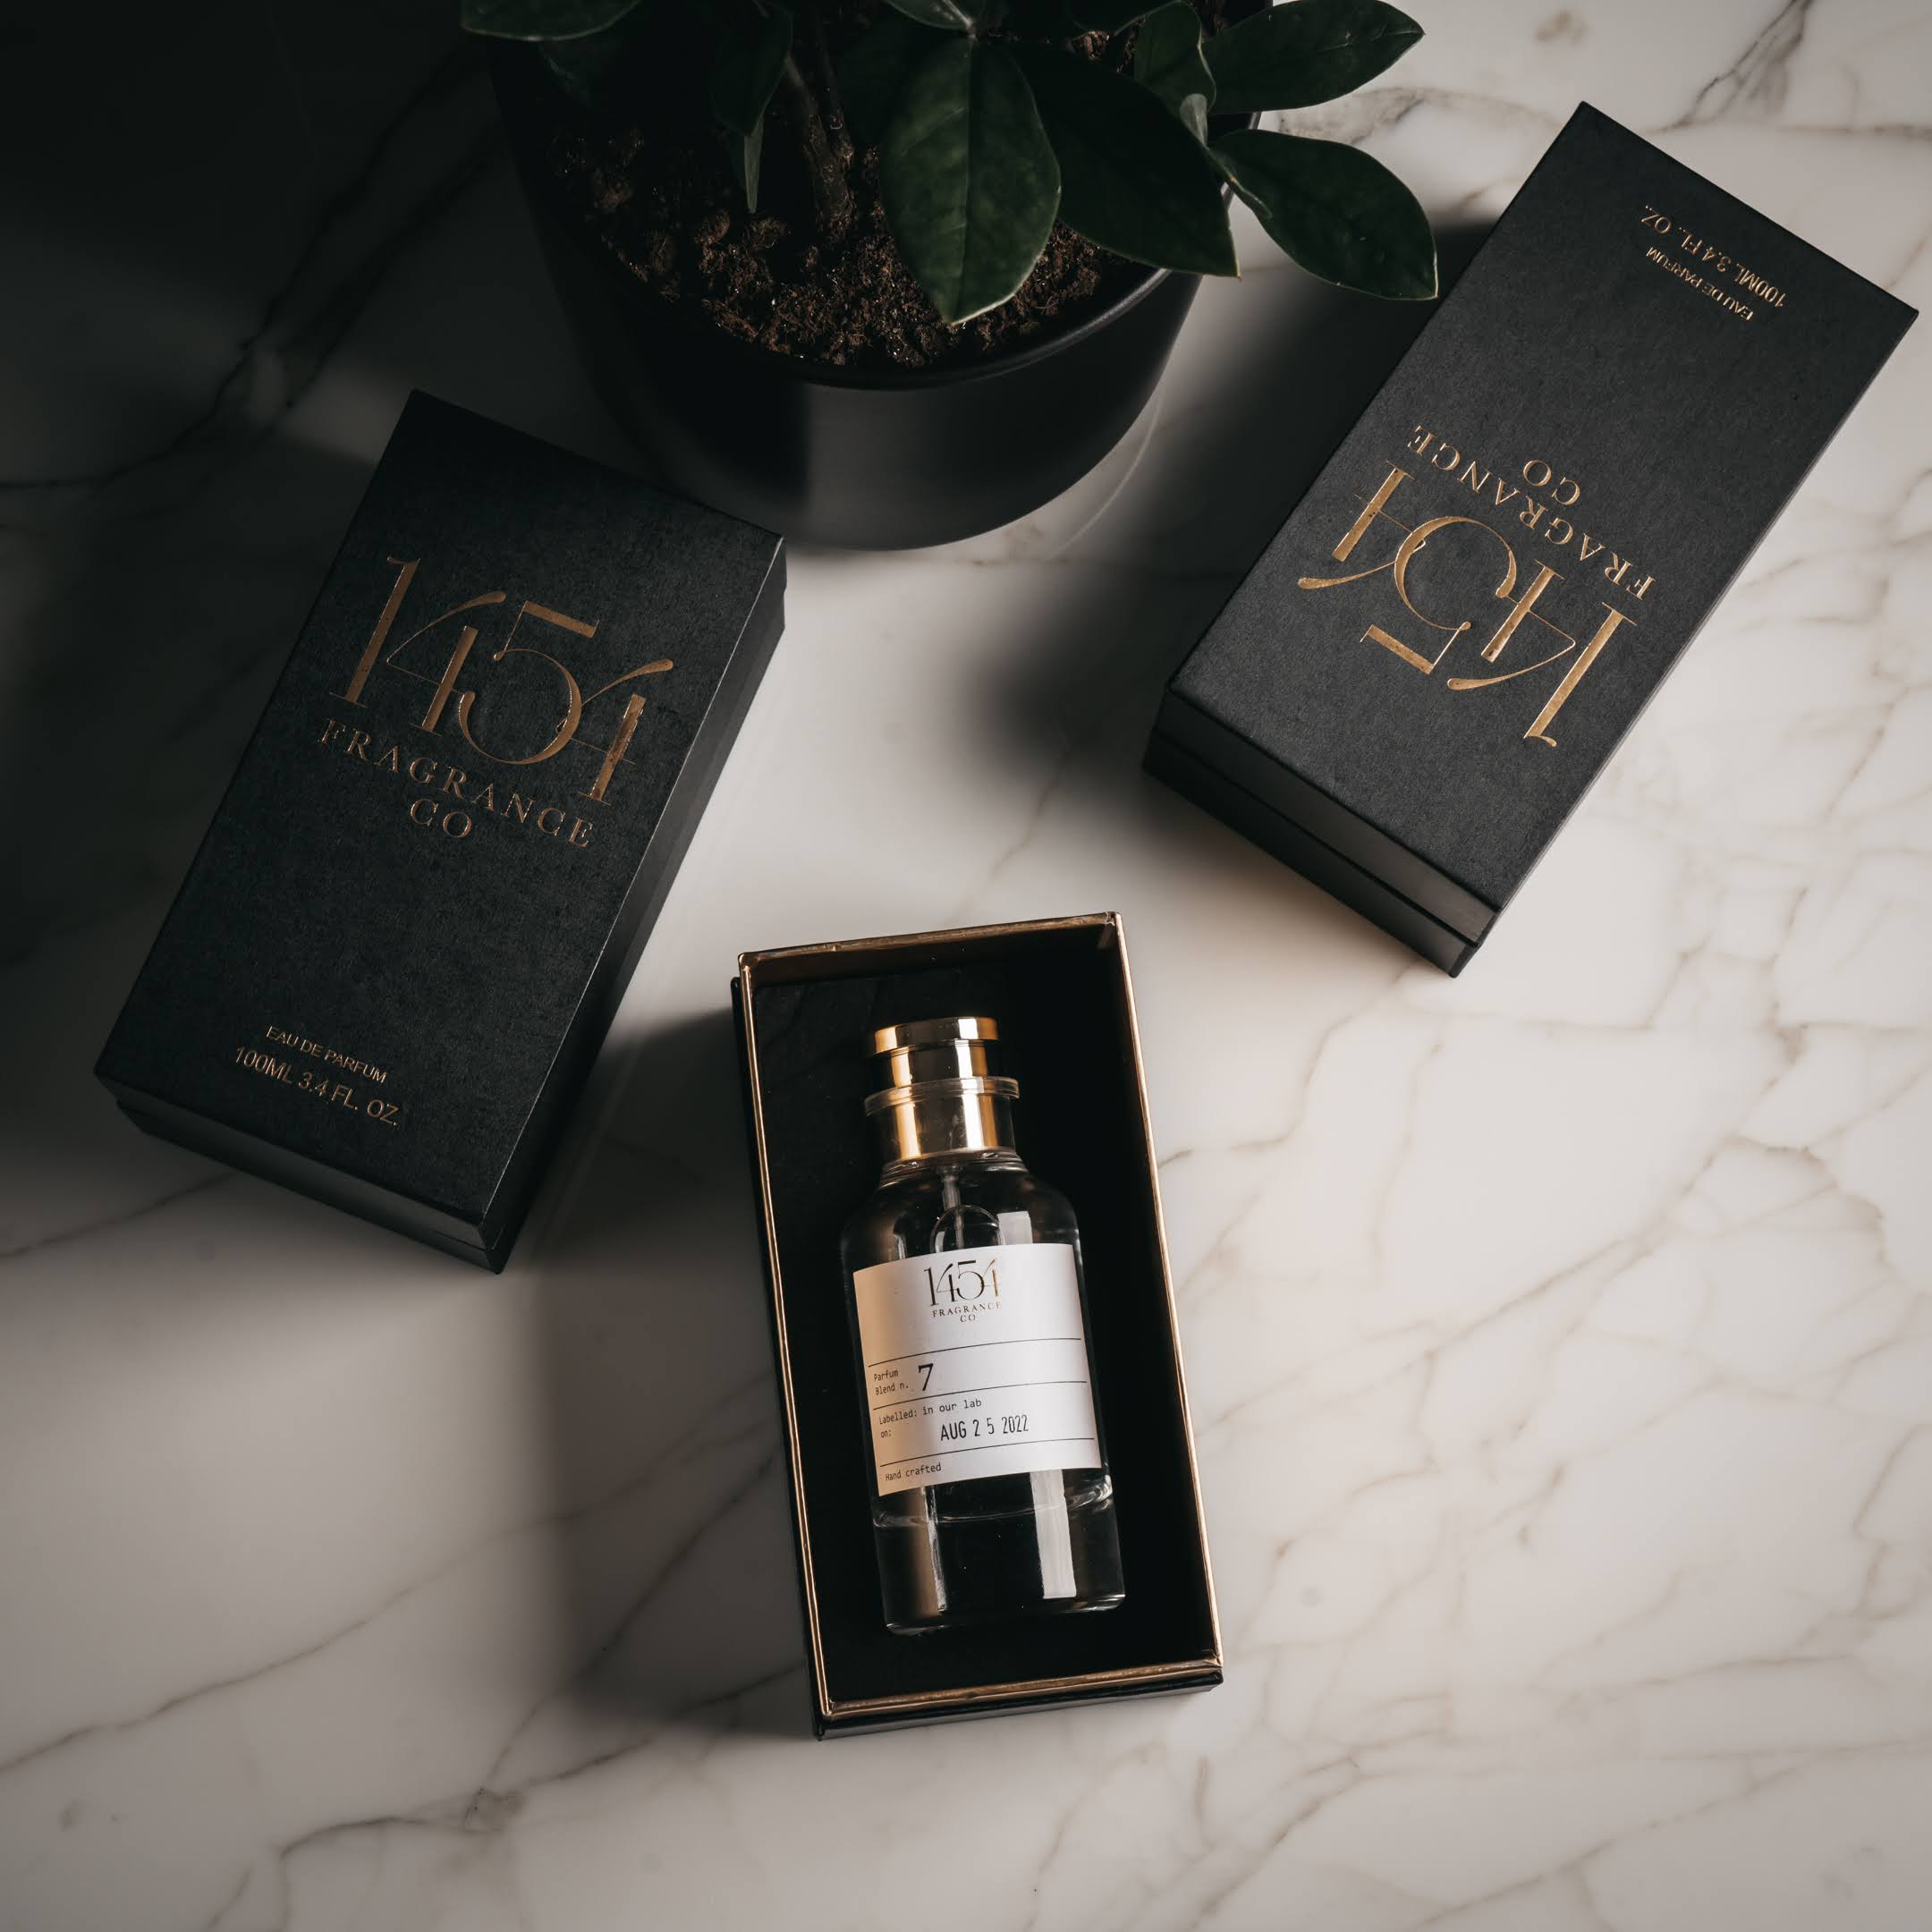 1454 Fragrance Co - Why spend so much on brand names when you can